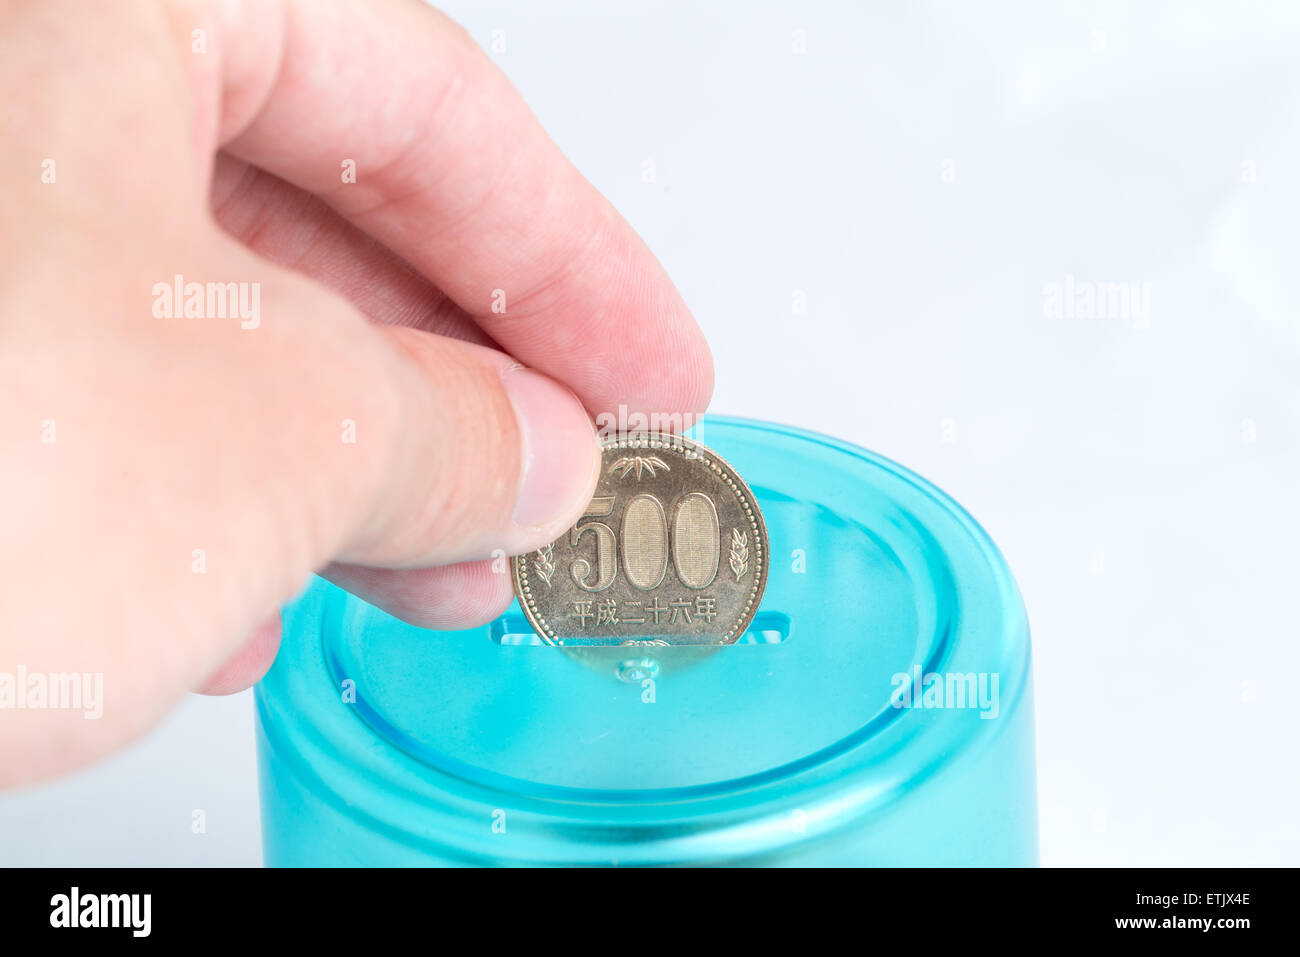 A man's hand putting a 500 Japanese Yen coin into a blue bank with a white background. Stock Photo